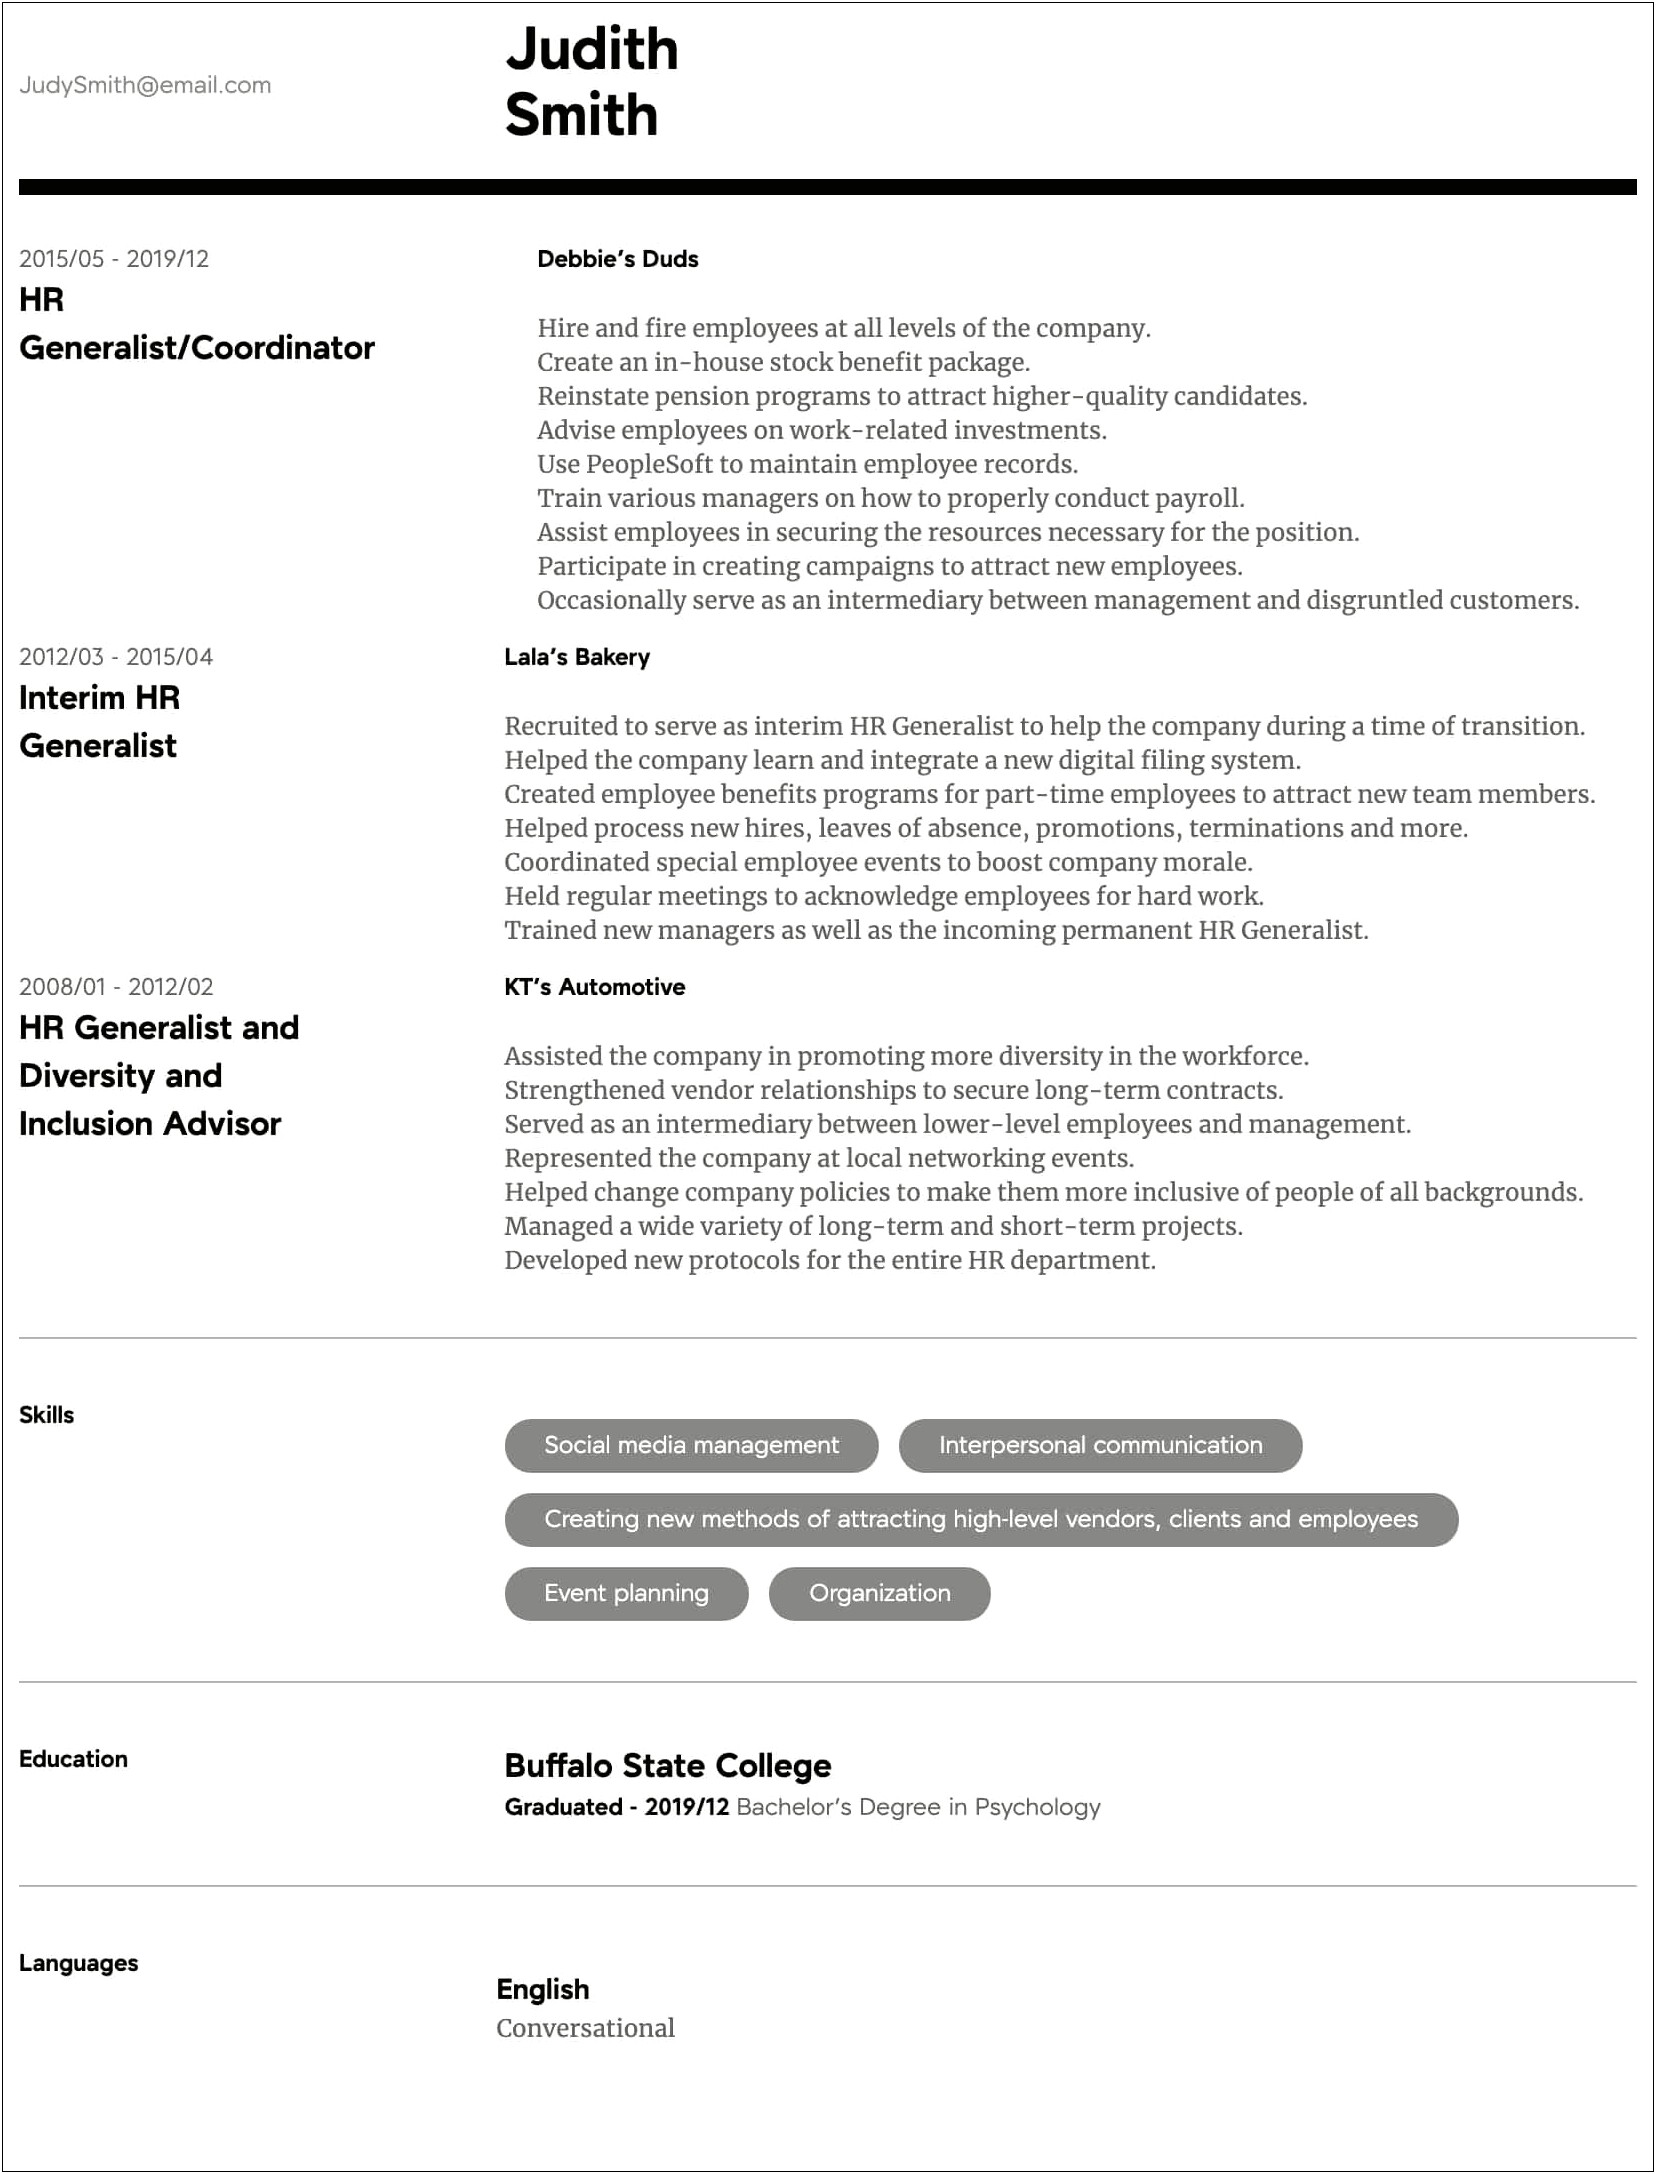 One Year Experience Resume Format For Hr